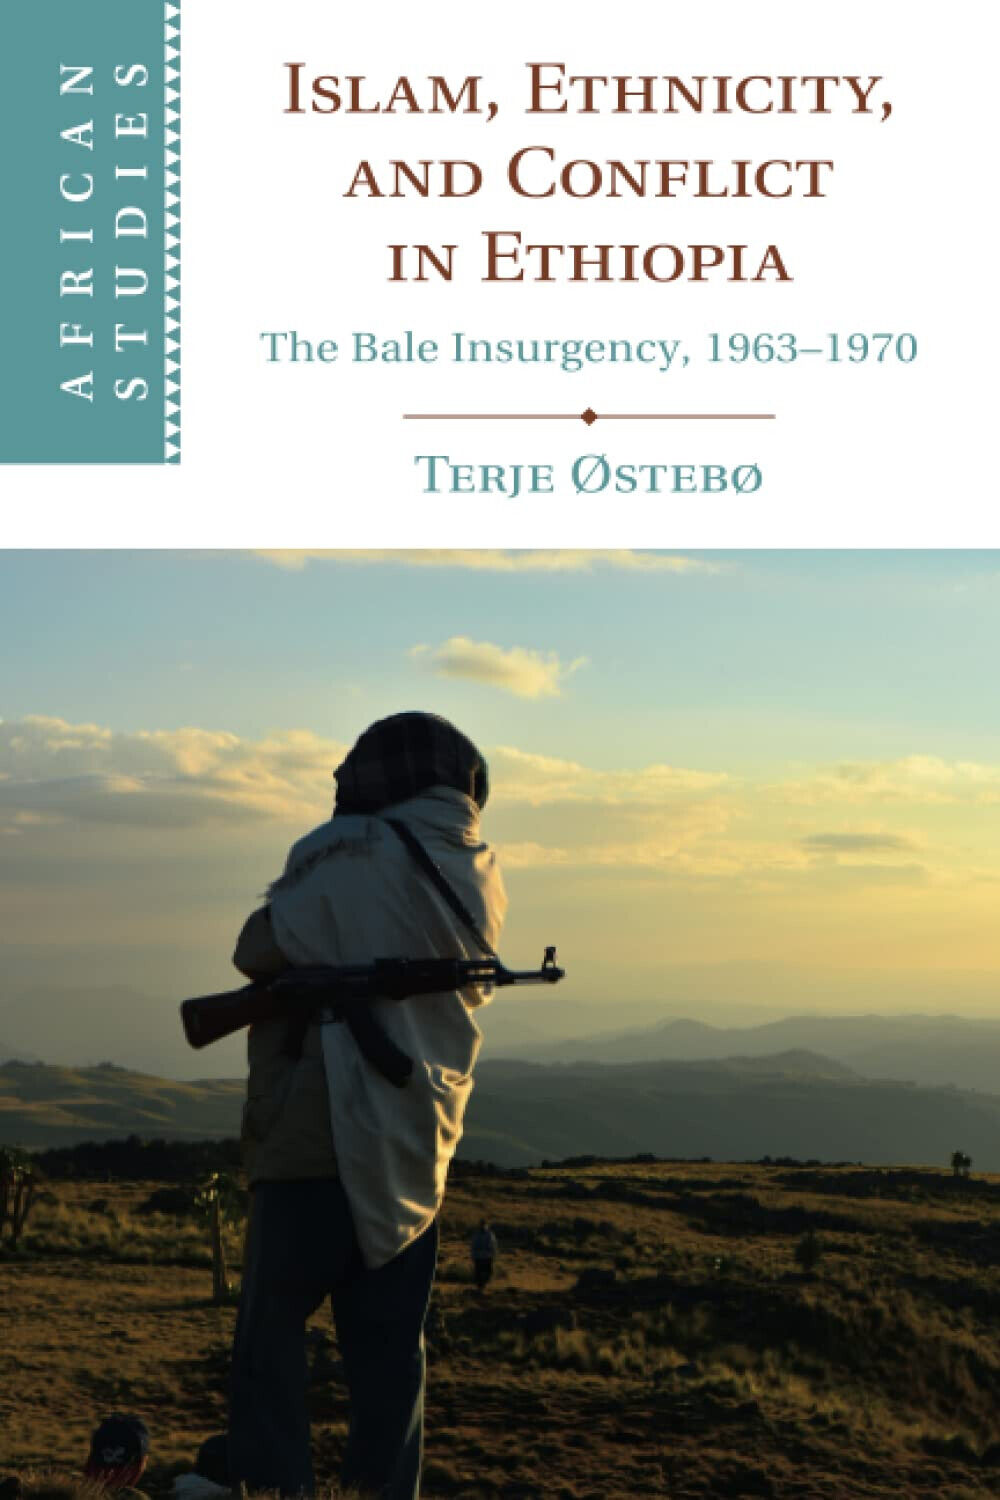 Islam, Ethnicity, And Conflict In Ethiopia - Terje Ostebo - Cambrdige, 2022